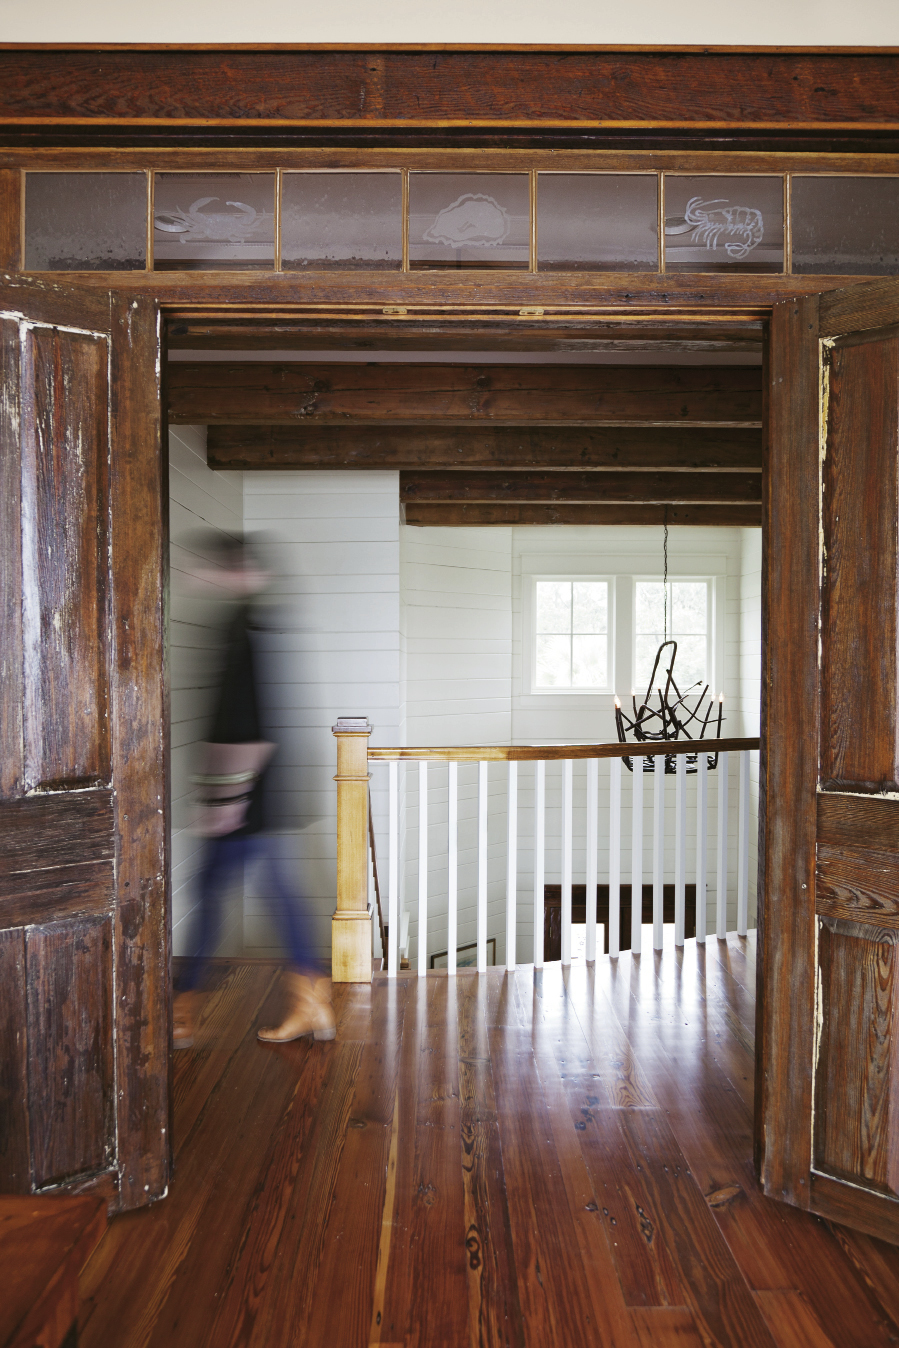 Exterior doors from a property in Newberry were fashioned as an entryway for an upstairs grandchildren’s room